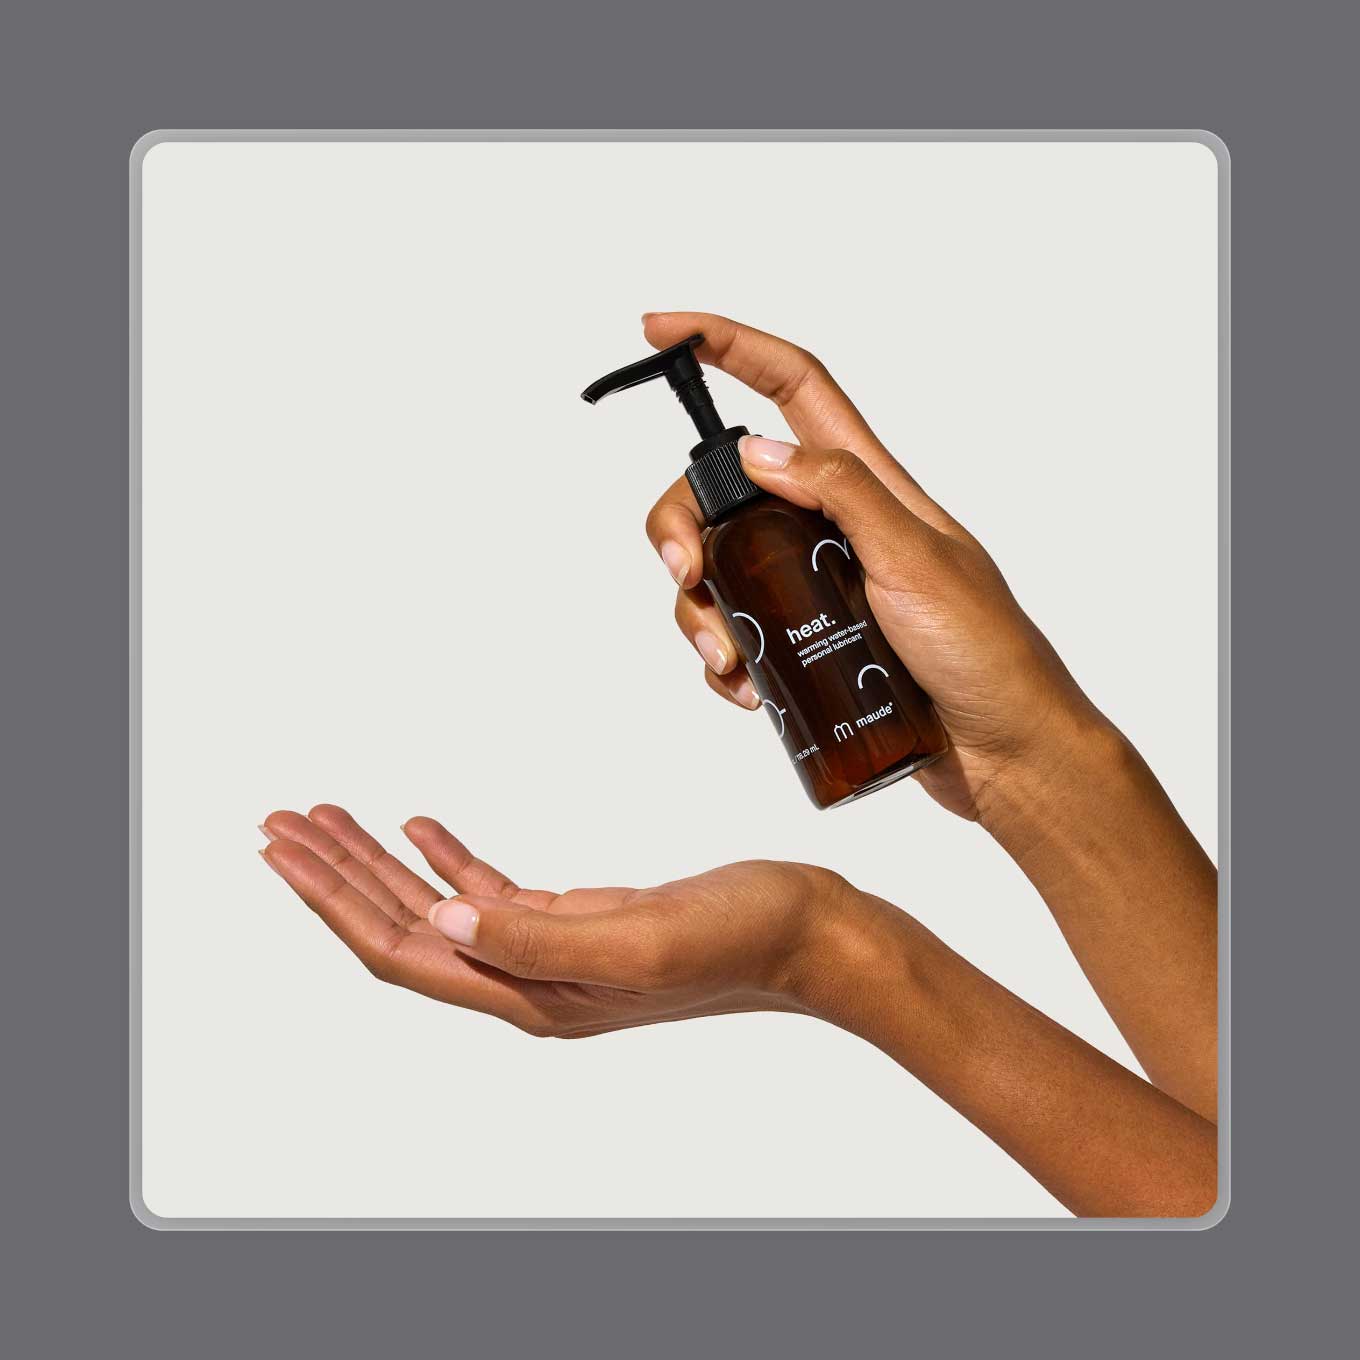 A hand holds up a bottle of Maude's heat lubricant